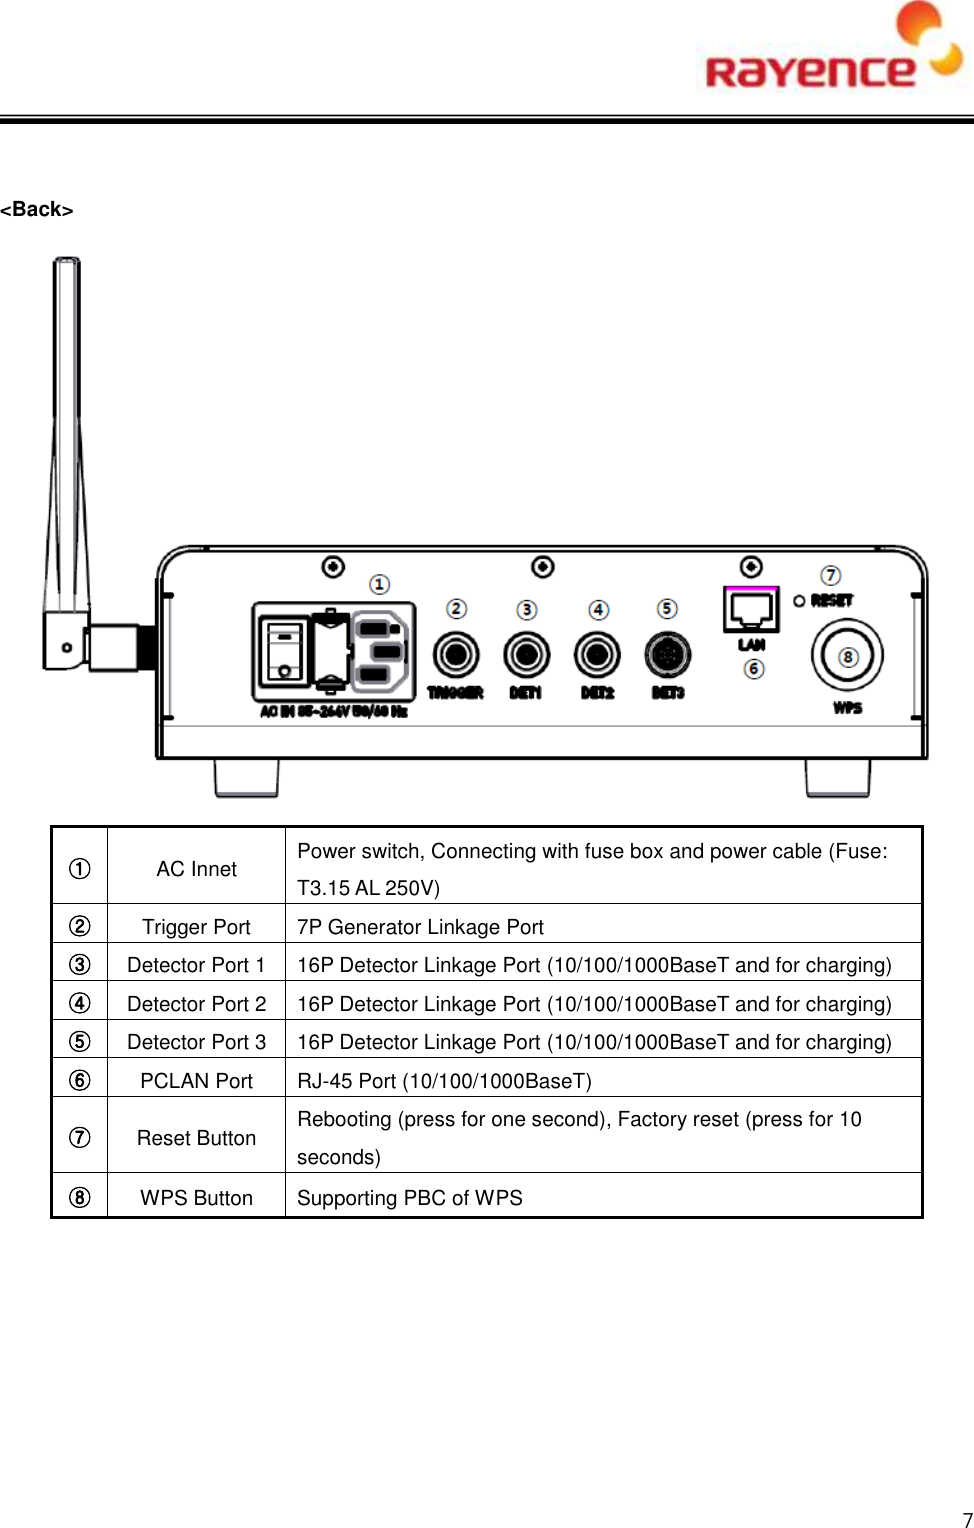  7    &lt;Back&gt;      ① AC Innet Power switch, Connecting with fuse box and power cable (Fuse: T3.15 AL 250V) ② Trigger Port 7P Generator Linkage Port ③ Detector Port 1 16P Detector Linkage Port (10/100/1000BaseT and for charging) ④ Detector Port 2 16P Detector Linkage Port (10/100/1000BaseT and for charging) ⑤ Detector Port 3 16P Detector Linkage Port (10/100/1000BaseT and for charging) ⑥ PCLAN Port RJ-45 Port (10/100/1000BaseT) ⑦ Reset Button Rebooting (press for one second), Factory reset (press for 10 seconds) ⑧ WPS Button Supporting PBC of WPS 